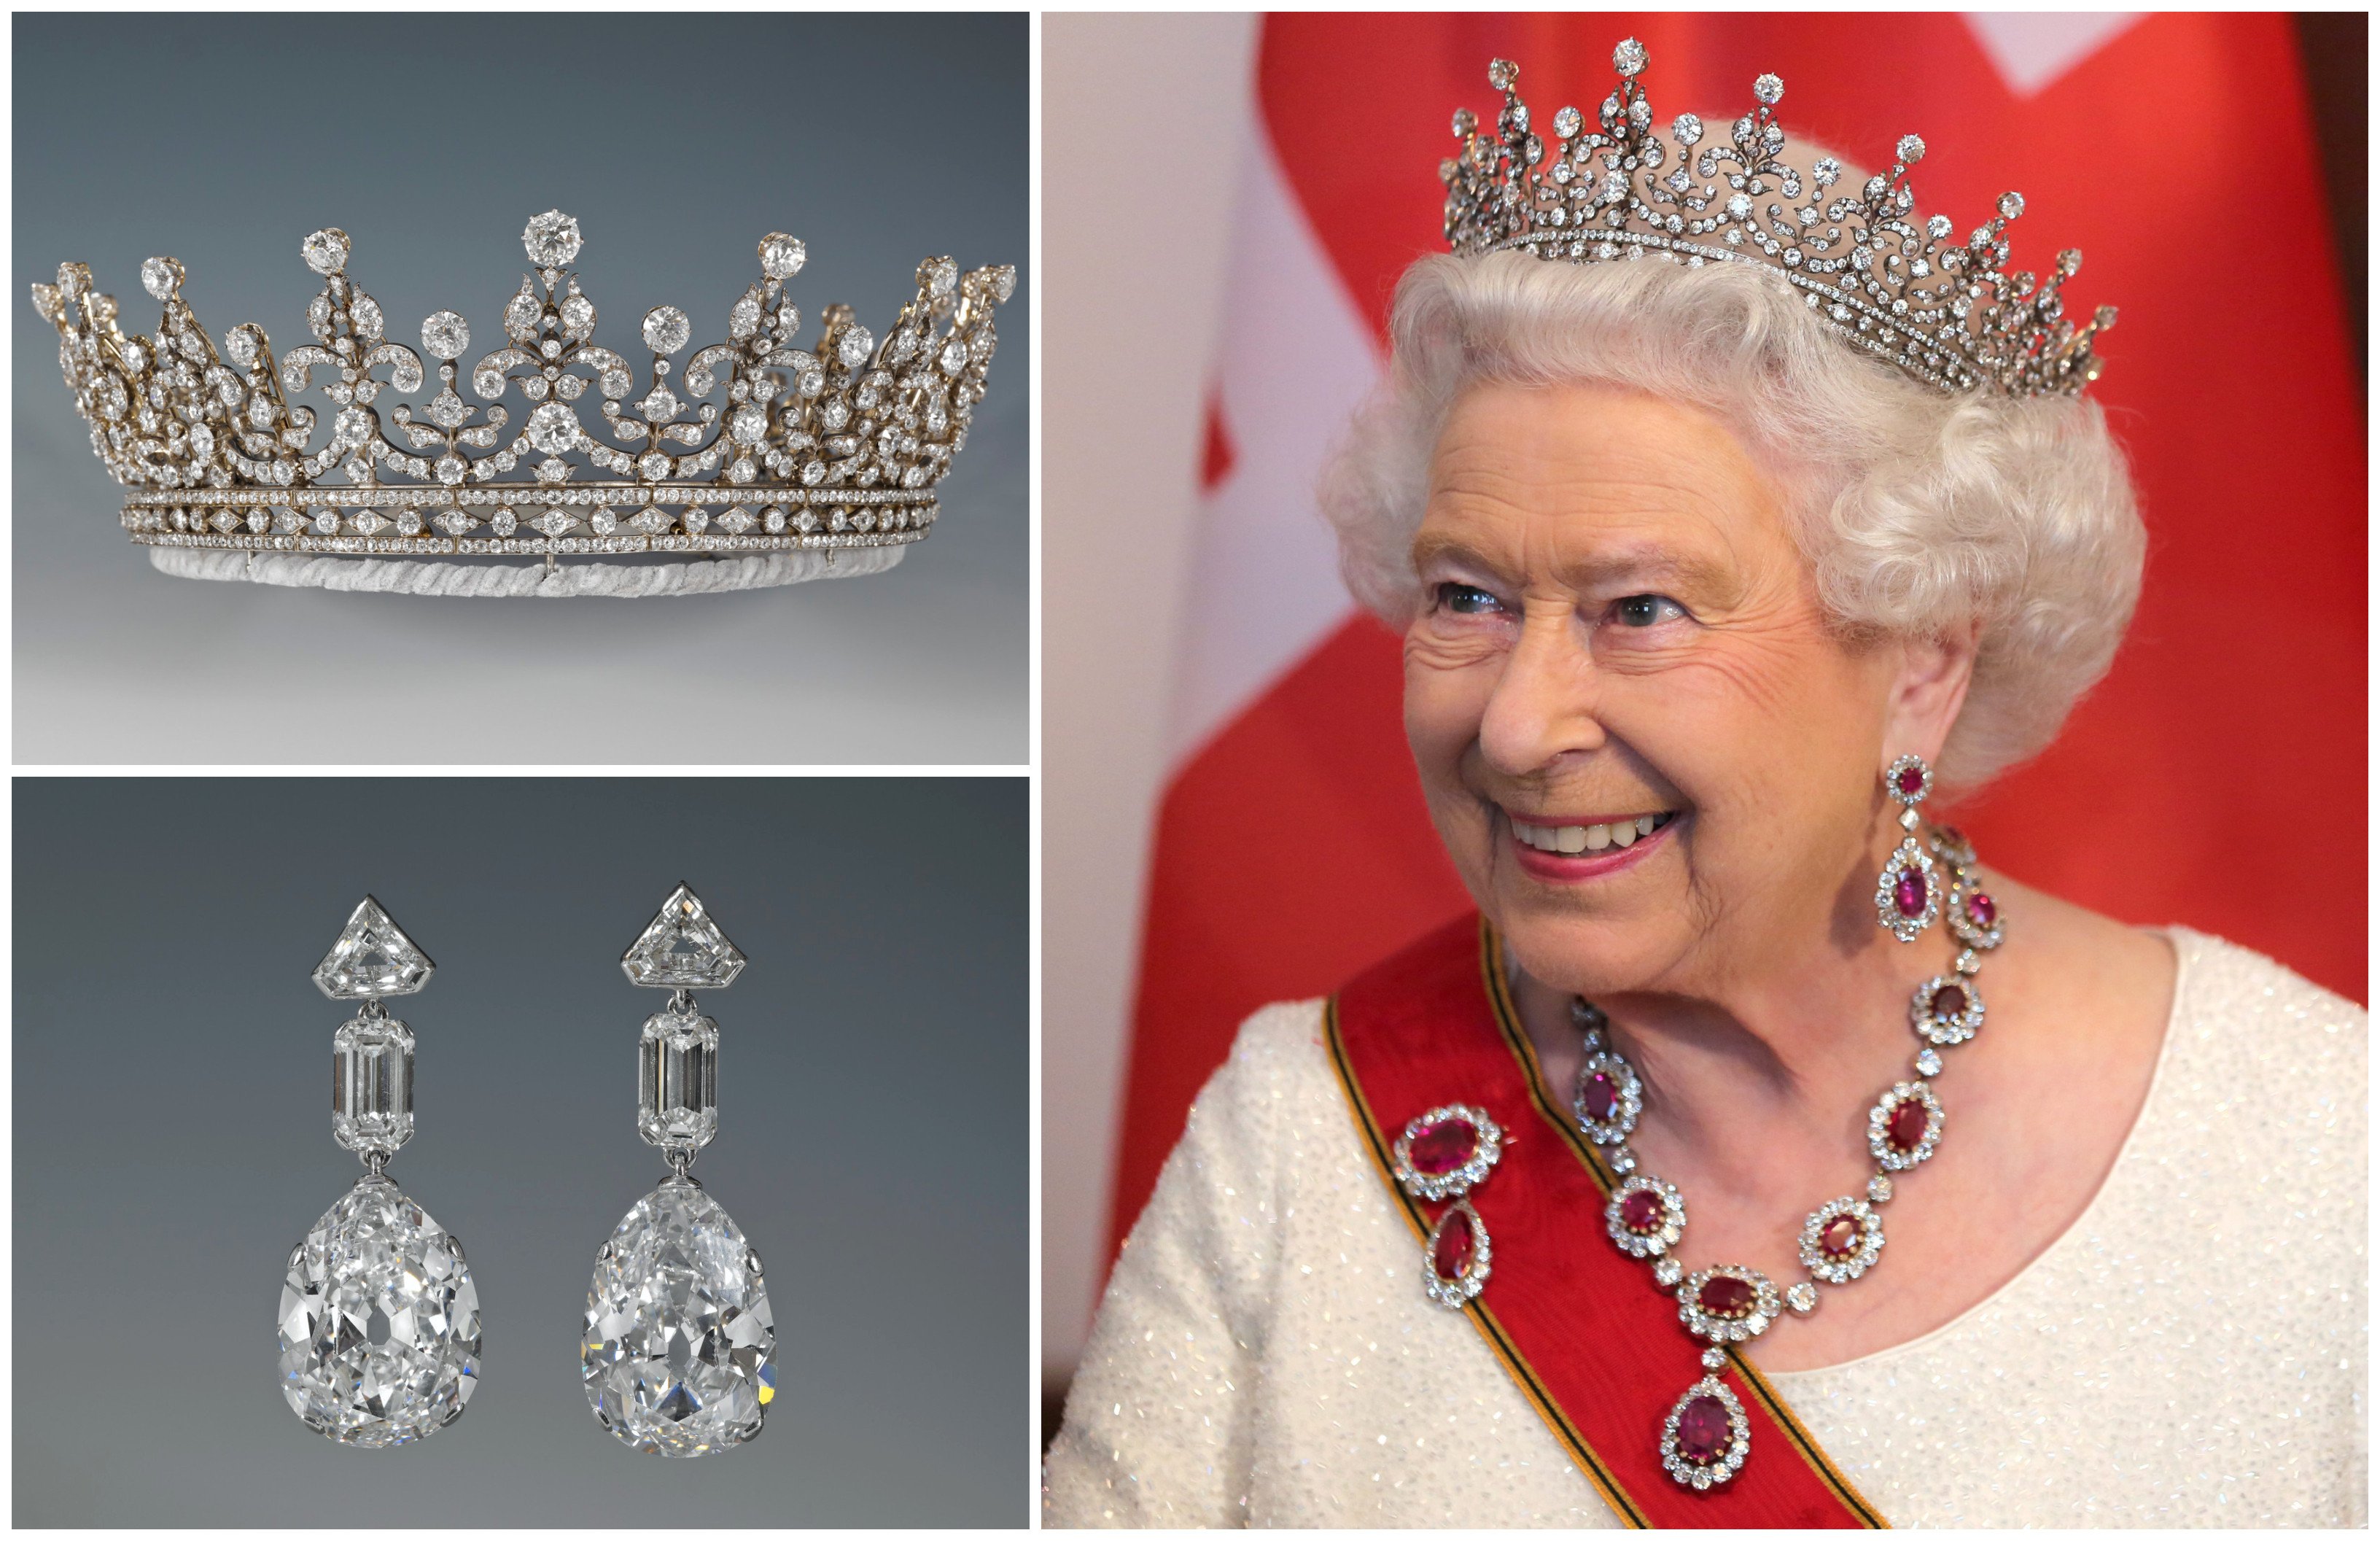 Queen Elizabeth’s sentimental favourites among the many pieces of jewellery in her collection, including the Girls of Great Britain and Ireland tiara and the Greville peardrop Earrings. Photo: Royal Collection Trust, EPA